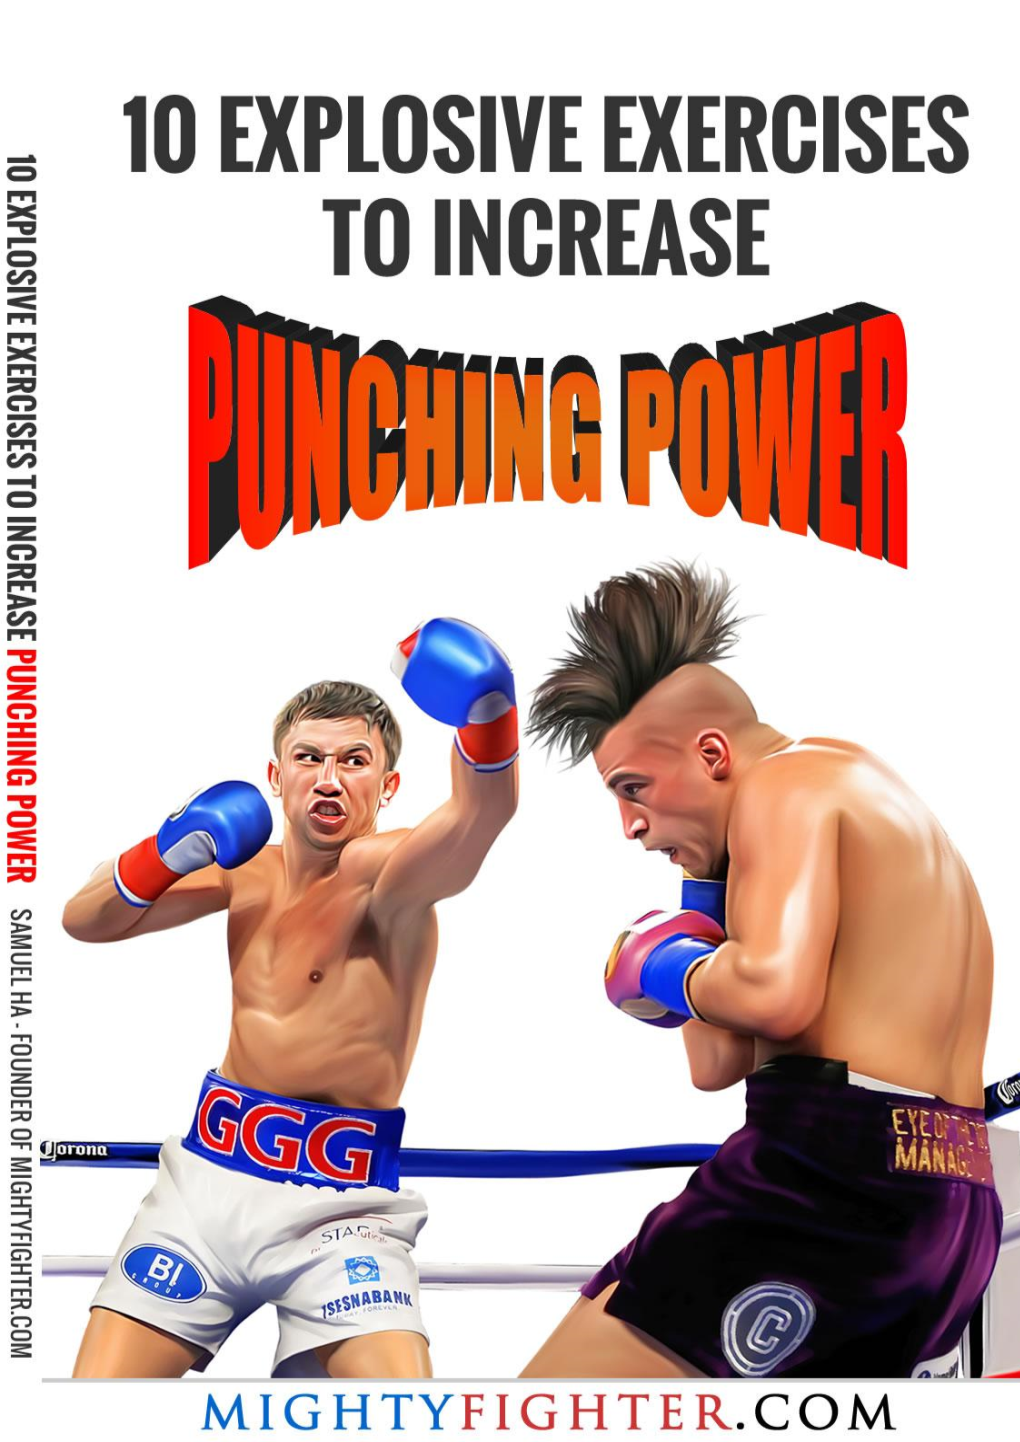 “The Best Online Boxing Course to Improve Punching Power, Hand